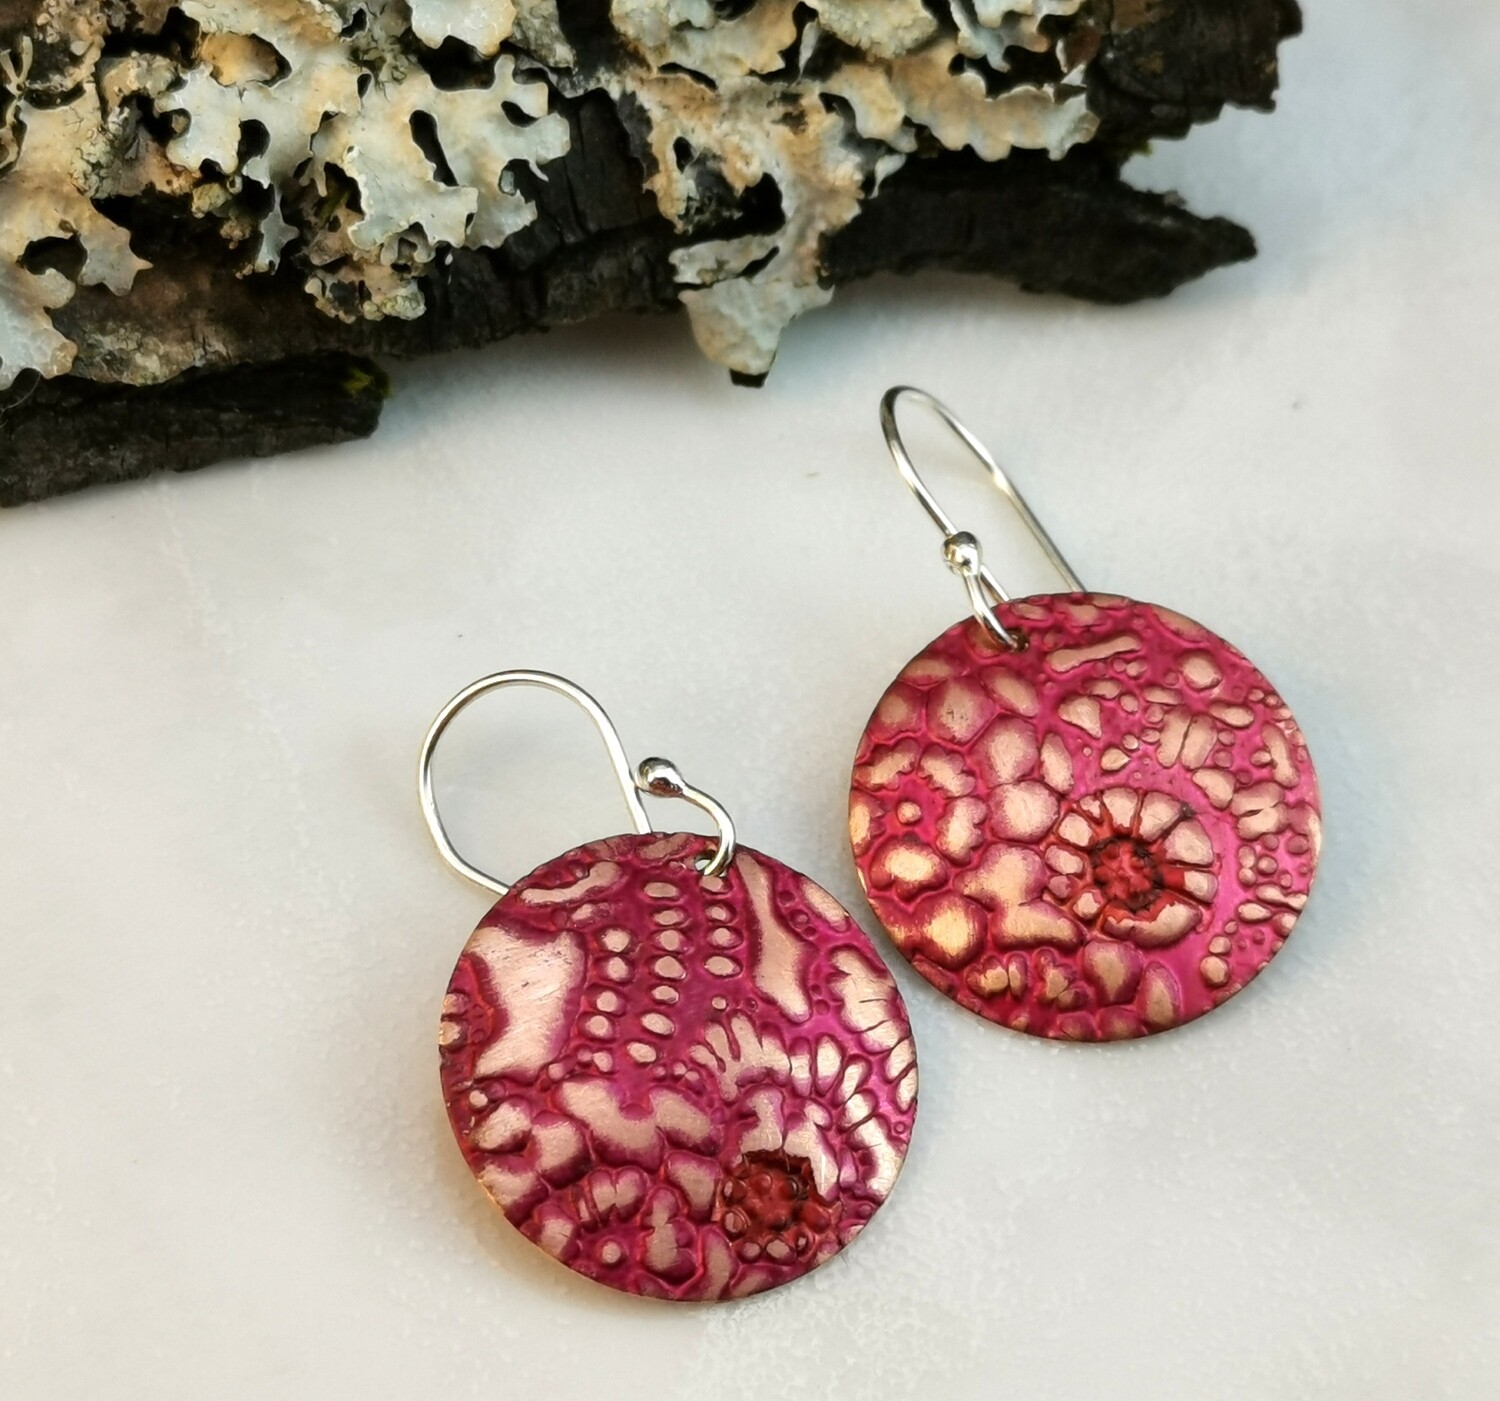 Hand Painted Raspberry Round Flower Patterned Copper Earrings on Sterling Silver Ear Wires